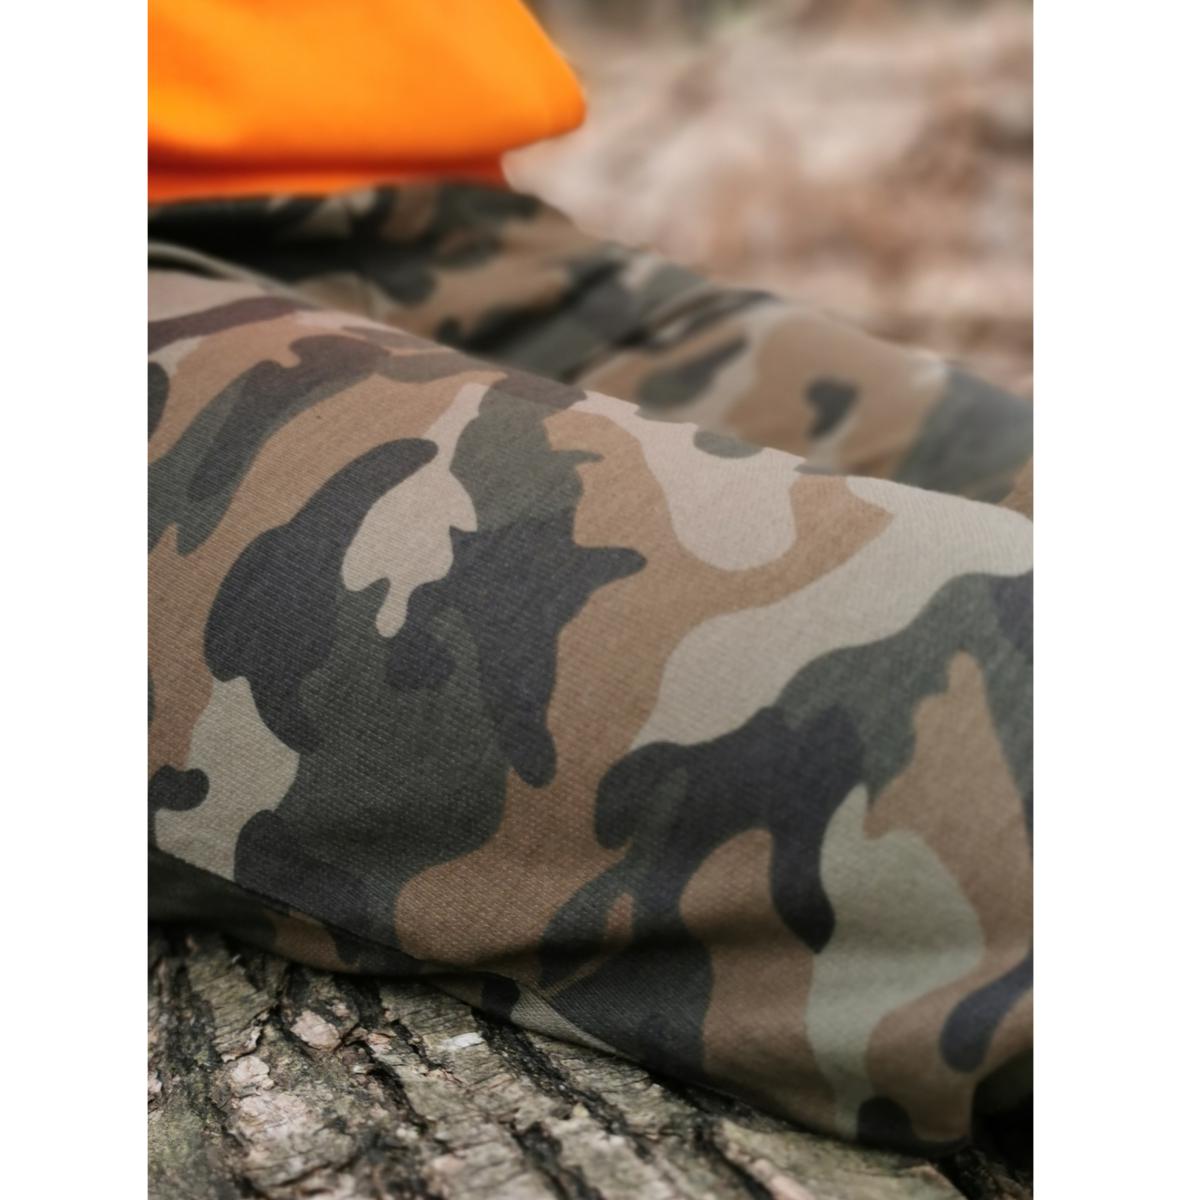 Jogging camouflage · Traqueur Chasse